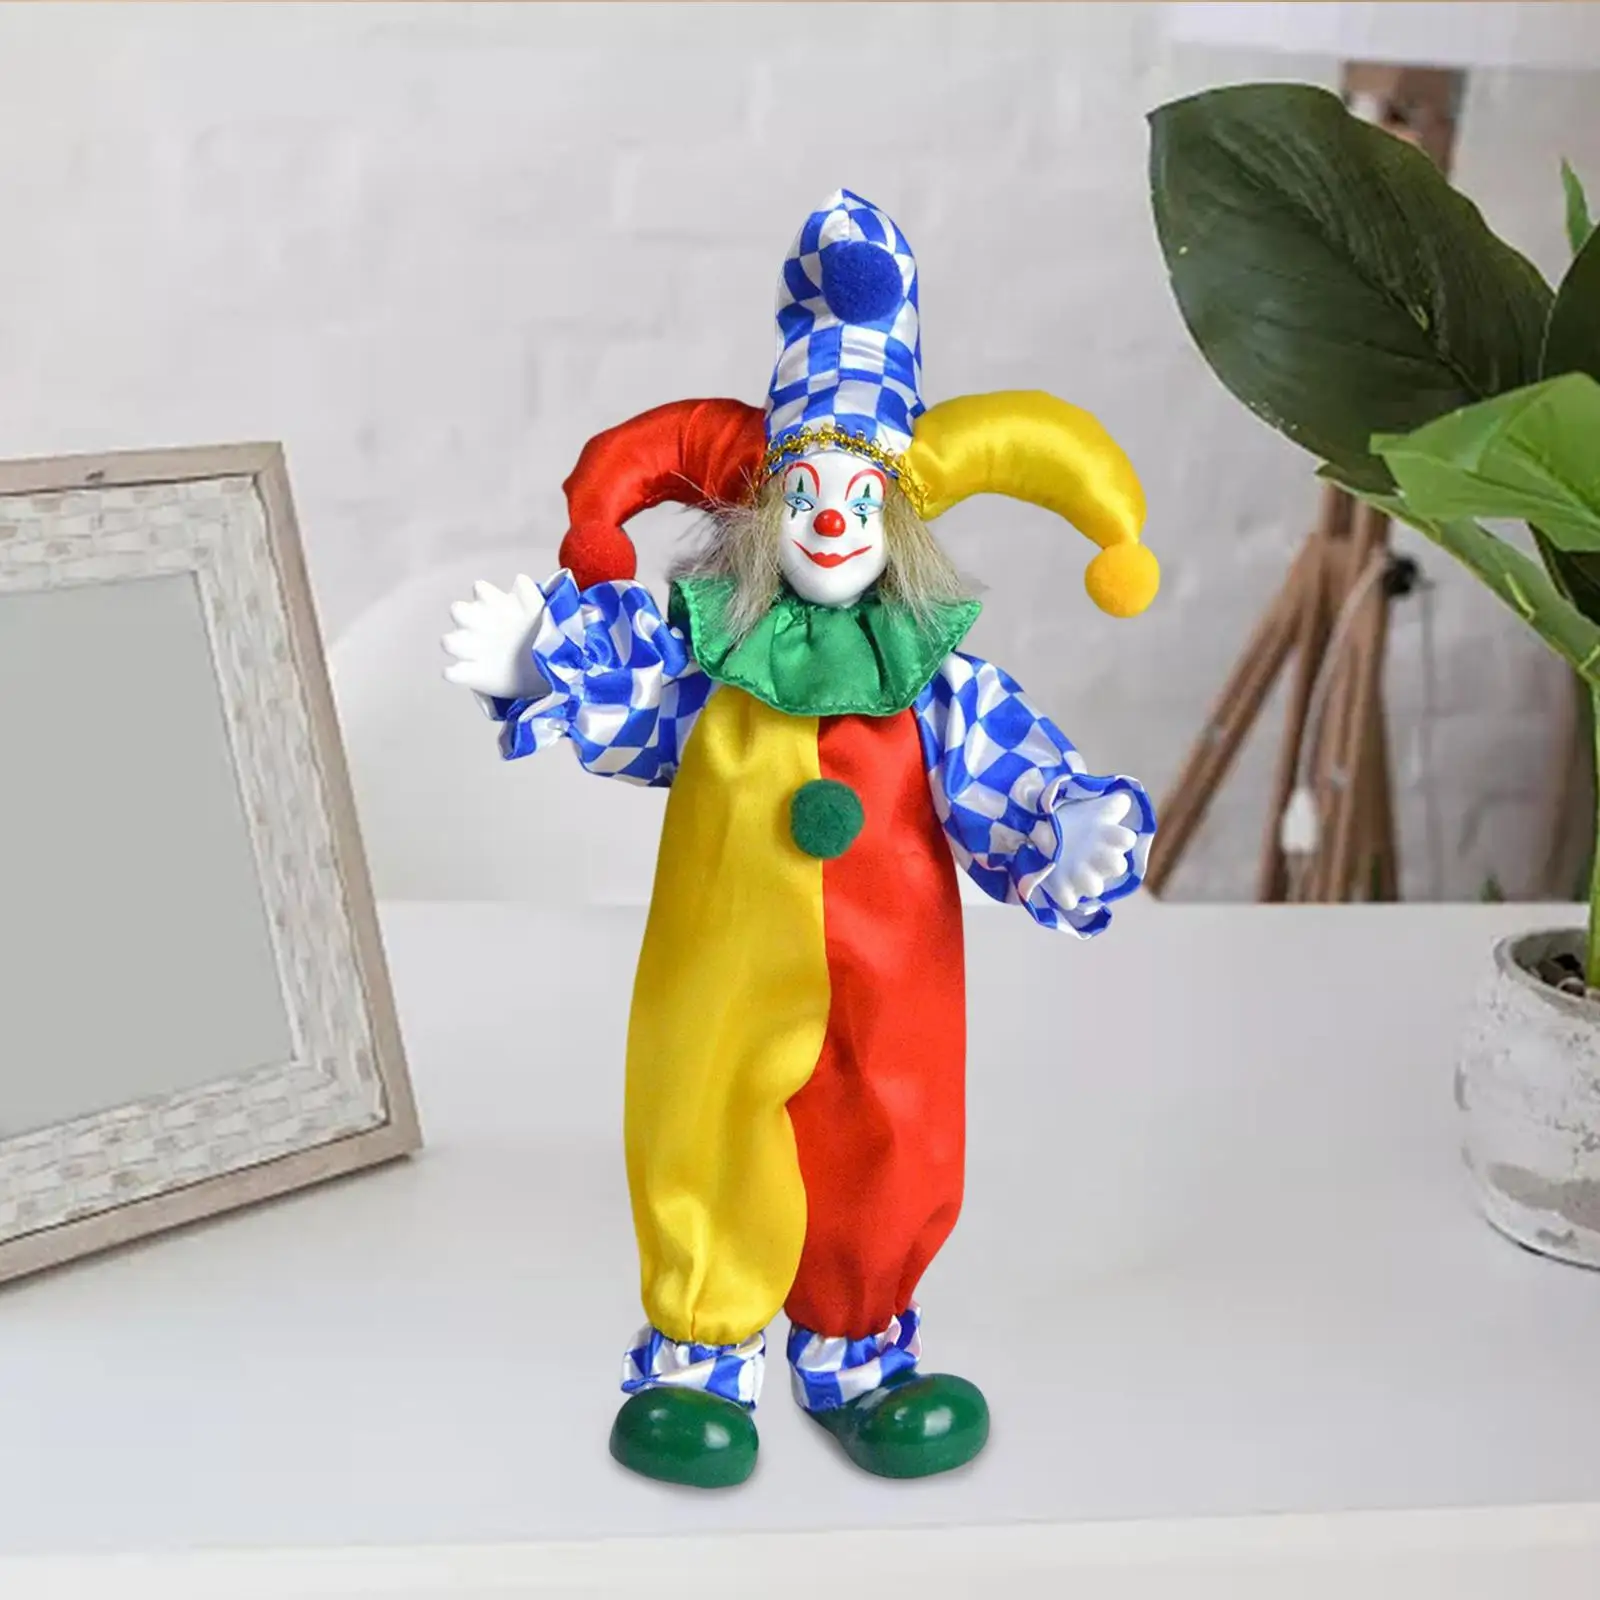 24cm Tall Clown Doll Figure with Clothes Arts Crafts Home Table Desk Decor Movable for Office Thanksgiving Halloween Decor